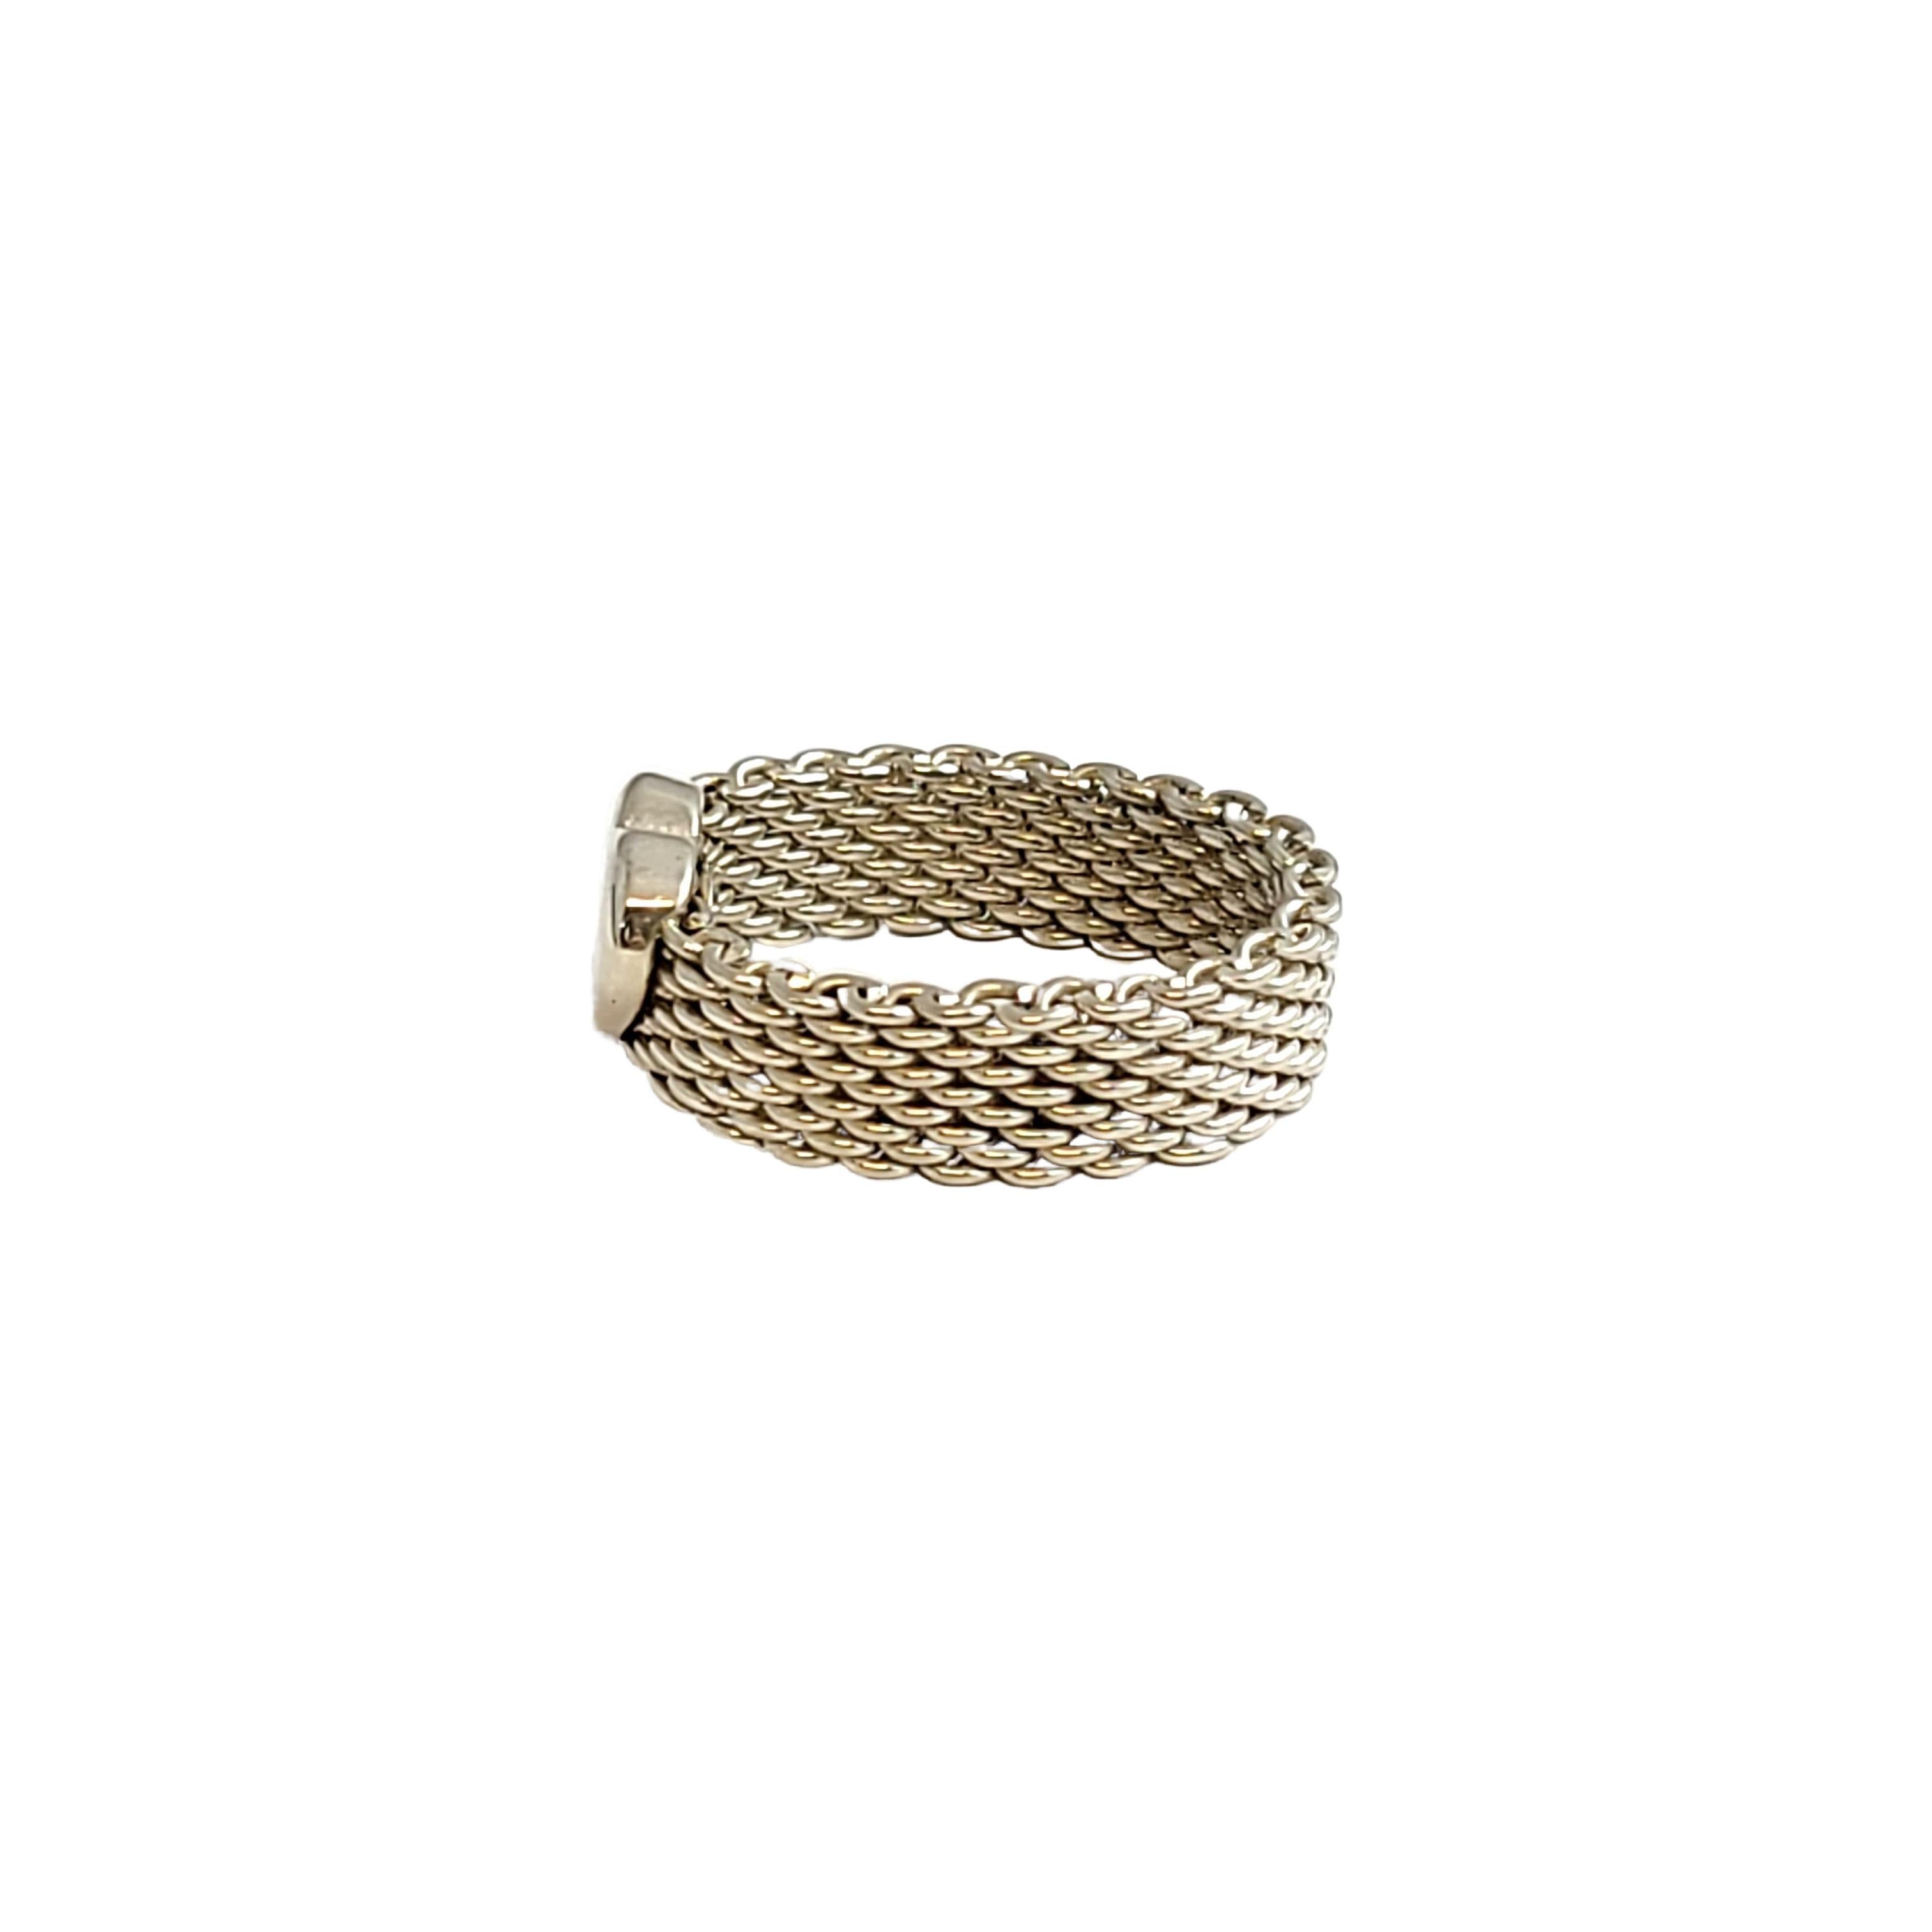 Tiffany & Co sterling silver Somerset mesh heart band ring.

Size 6.5

Authentic Tiffany ring featuring an open heart on a mesh band. Tiffany box or pouch are not included.

Measures approx 1/4